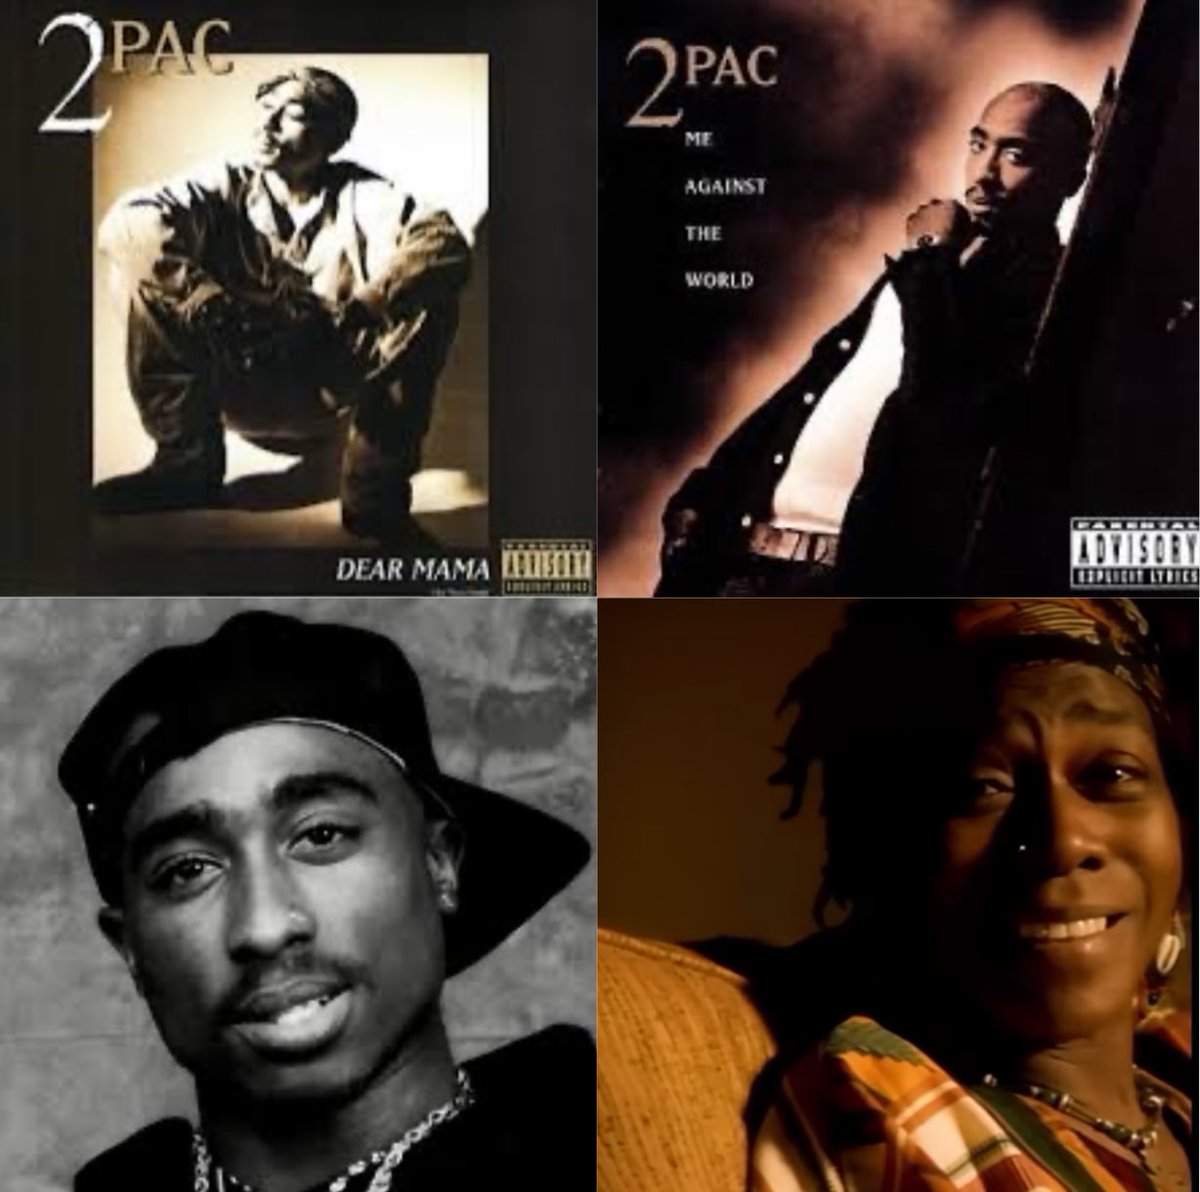 #HipHopPodcasts #Tupac #MothersDay #Podcasts #fyp #fy  #viral #DearMama #2Pac #MeAgainstTheWorld #TonyPizarro #AfeniShakur #LionelCMartin #Interscope #DeathrowRecords #90sHipHop #WestCoastHipHop